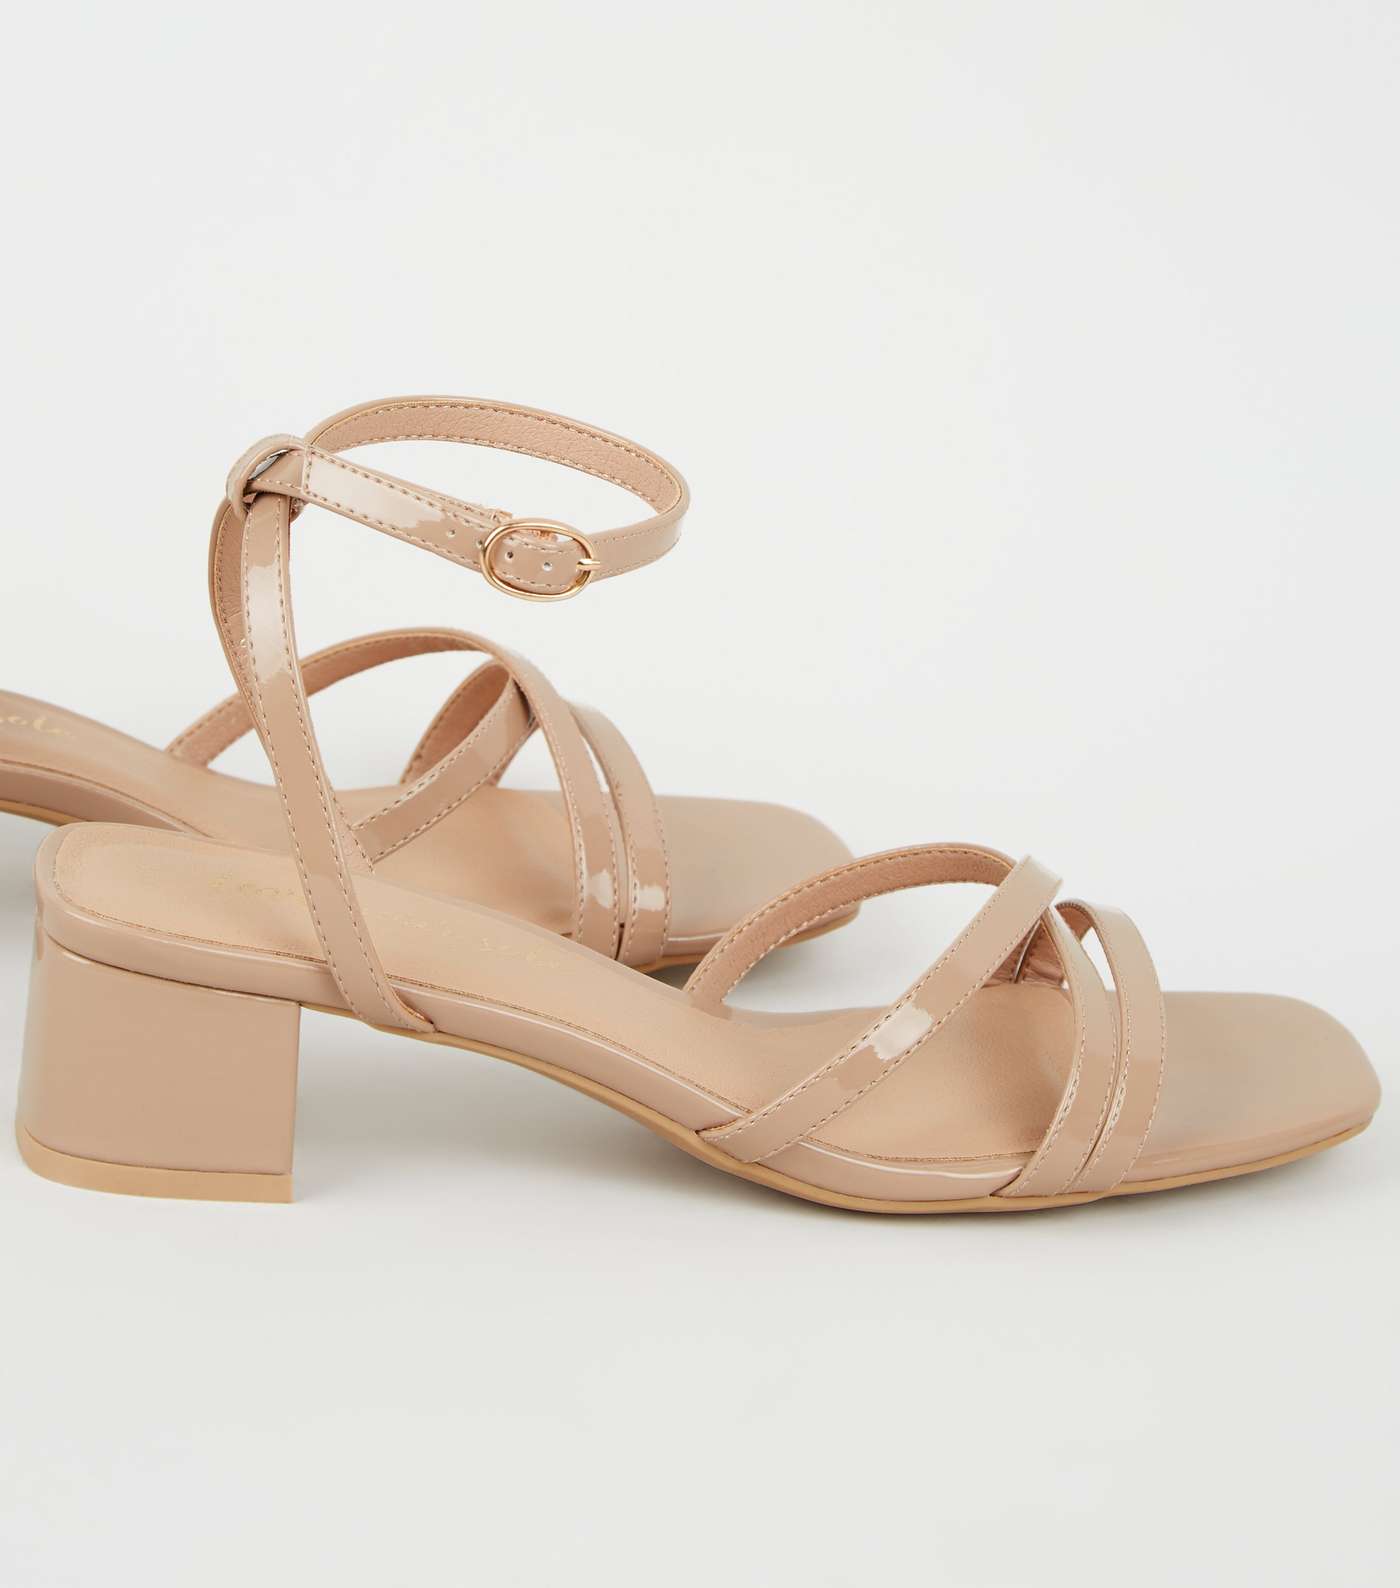 Camel Patent Strappy Low Heel Sandals Image 3